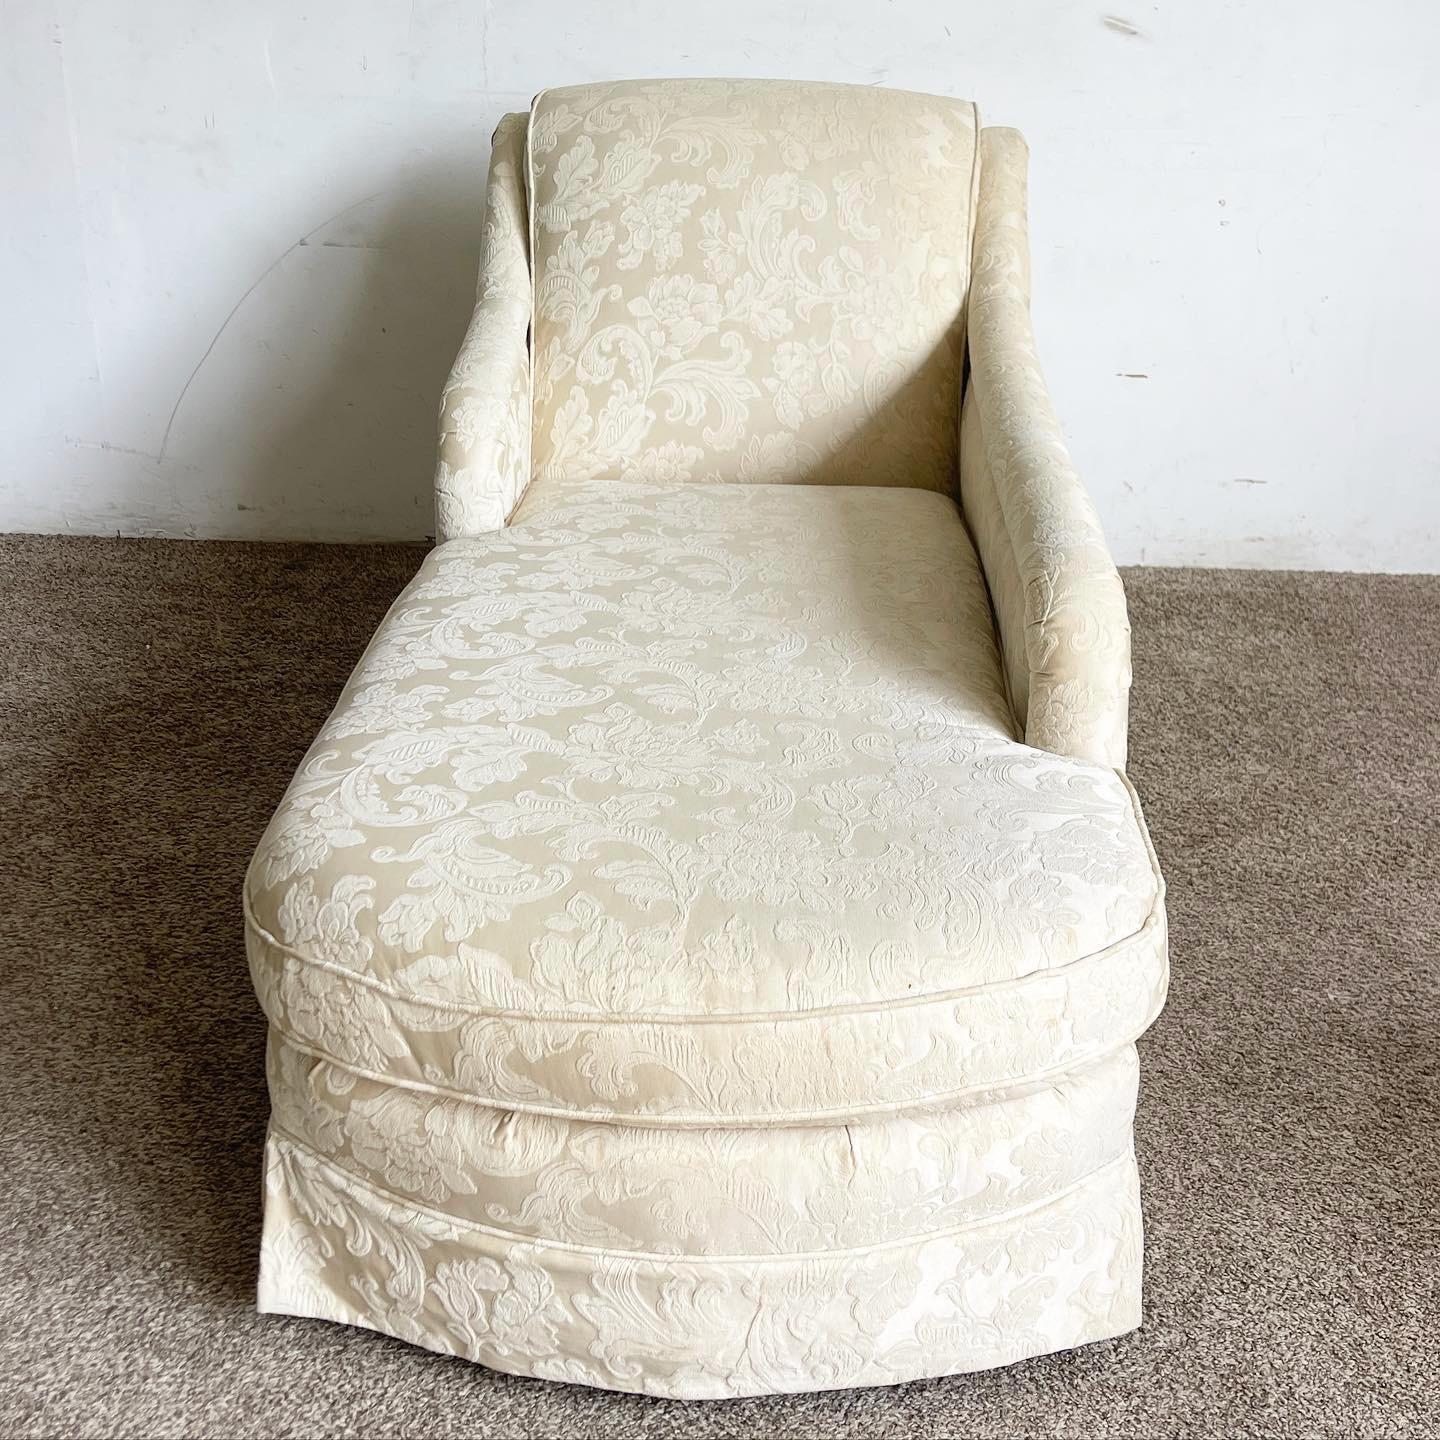 American Regency Cream Fabric Chaise Lounge For Sale